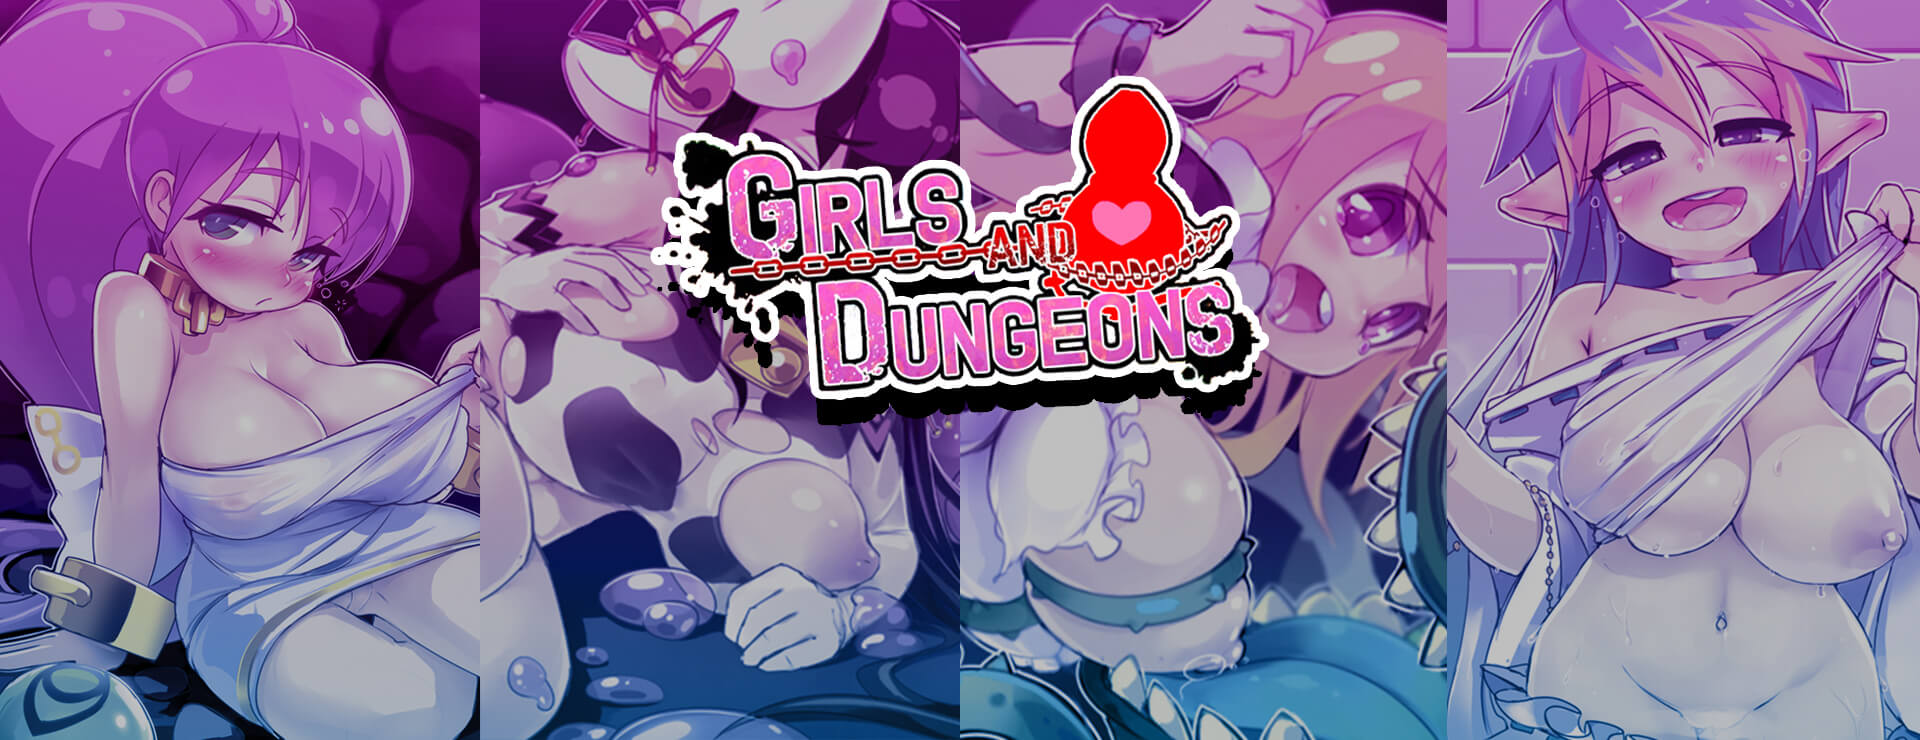 Girls And Dungeons - RPG ゲーム